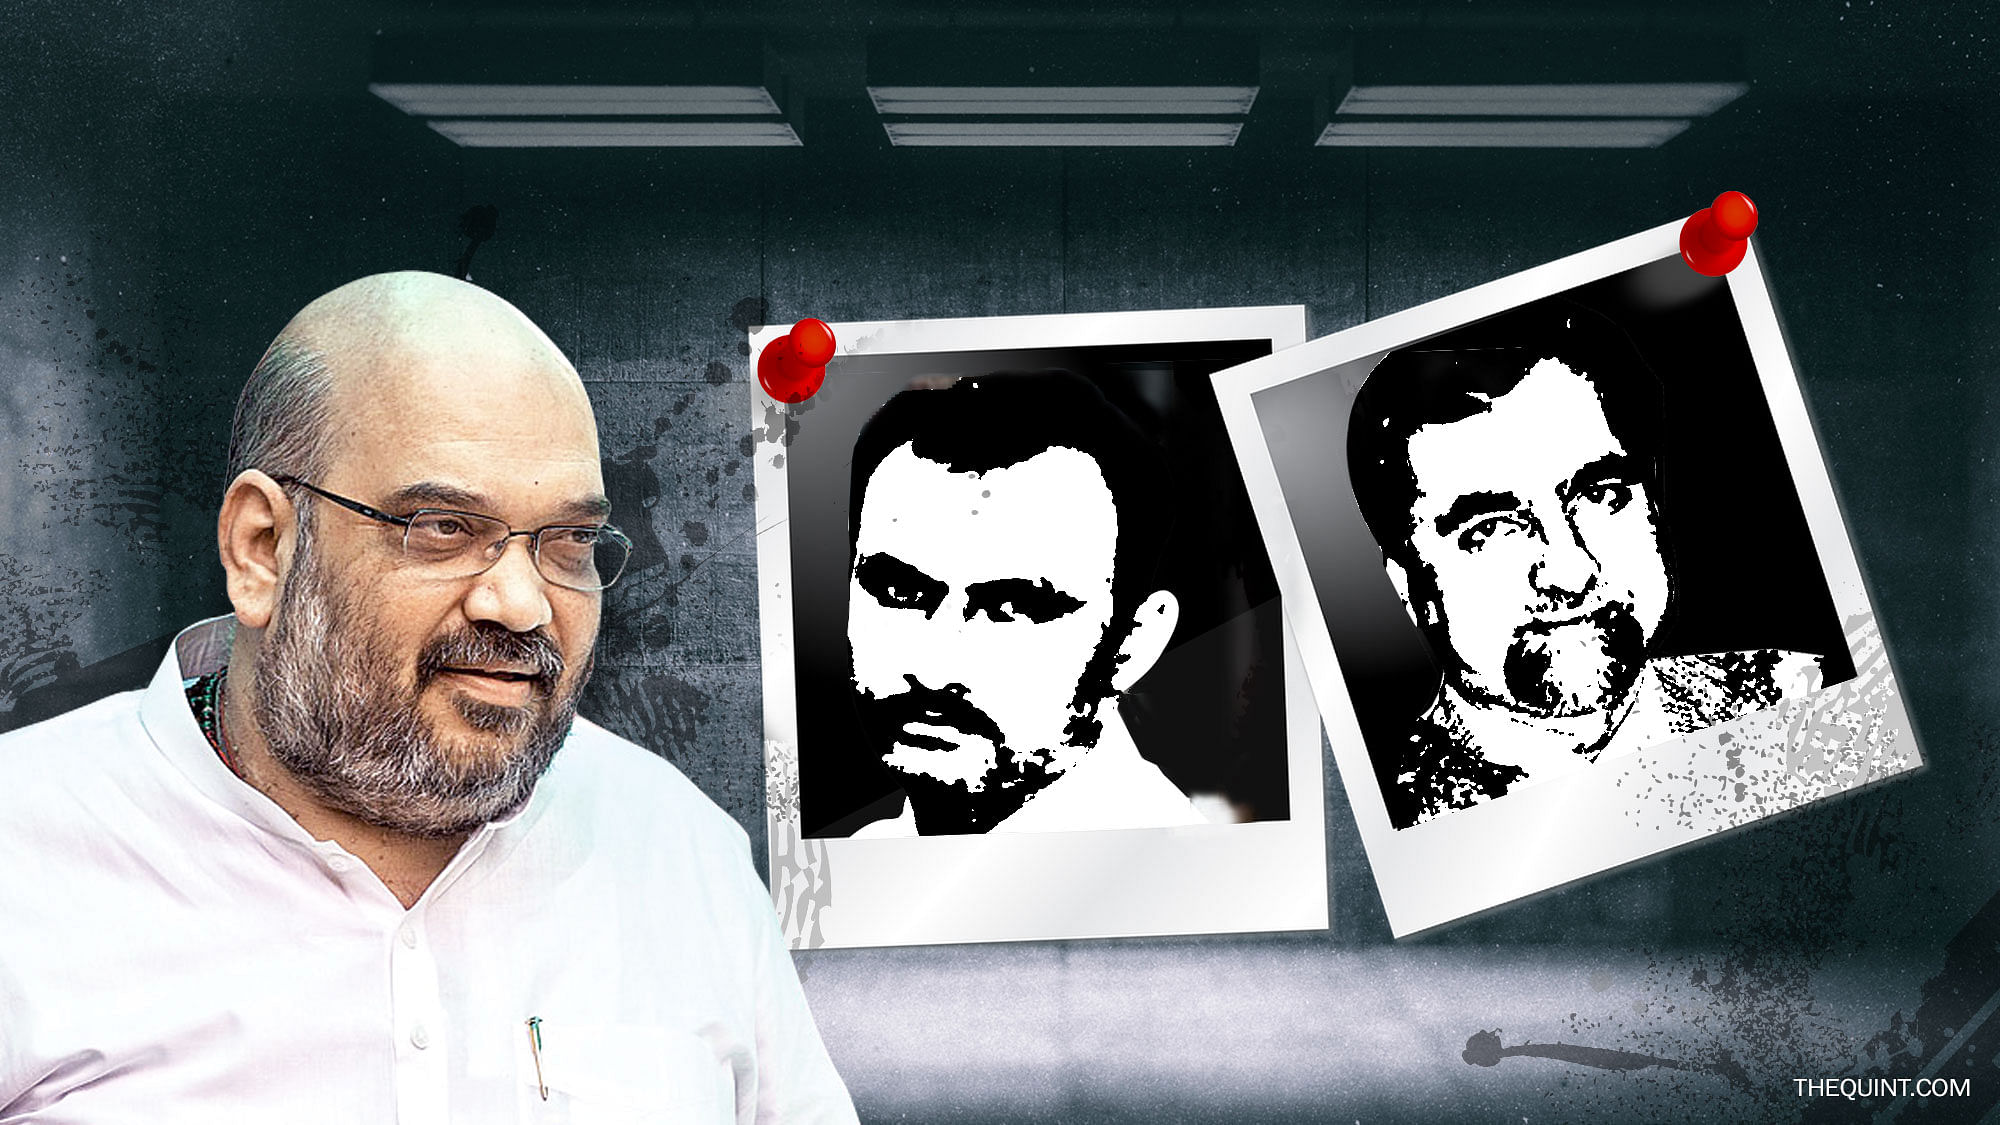 The family of Judge Loya, who was hearing the Sohrabuddin Sheikh encounter case in which Amit Shah was prime accused, have made some disturbing claims.